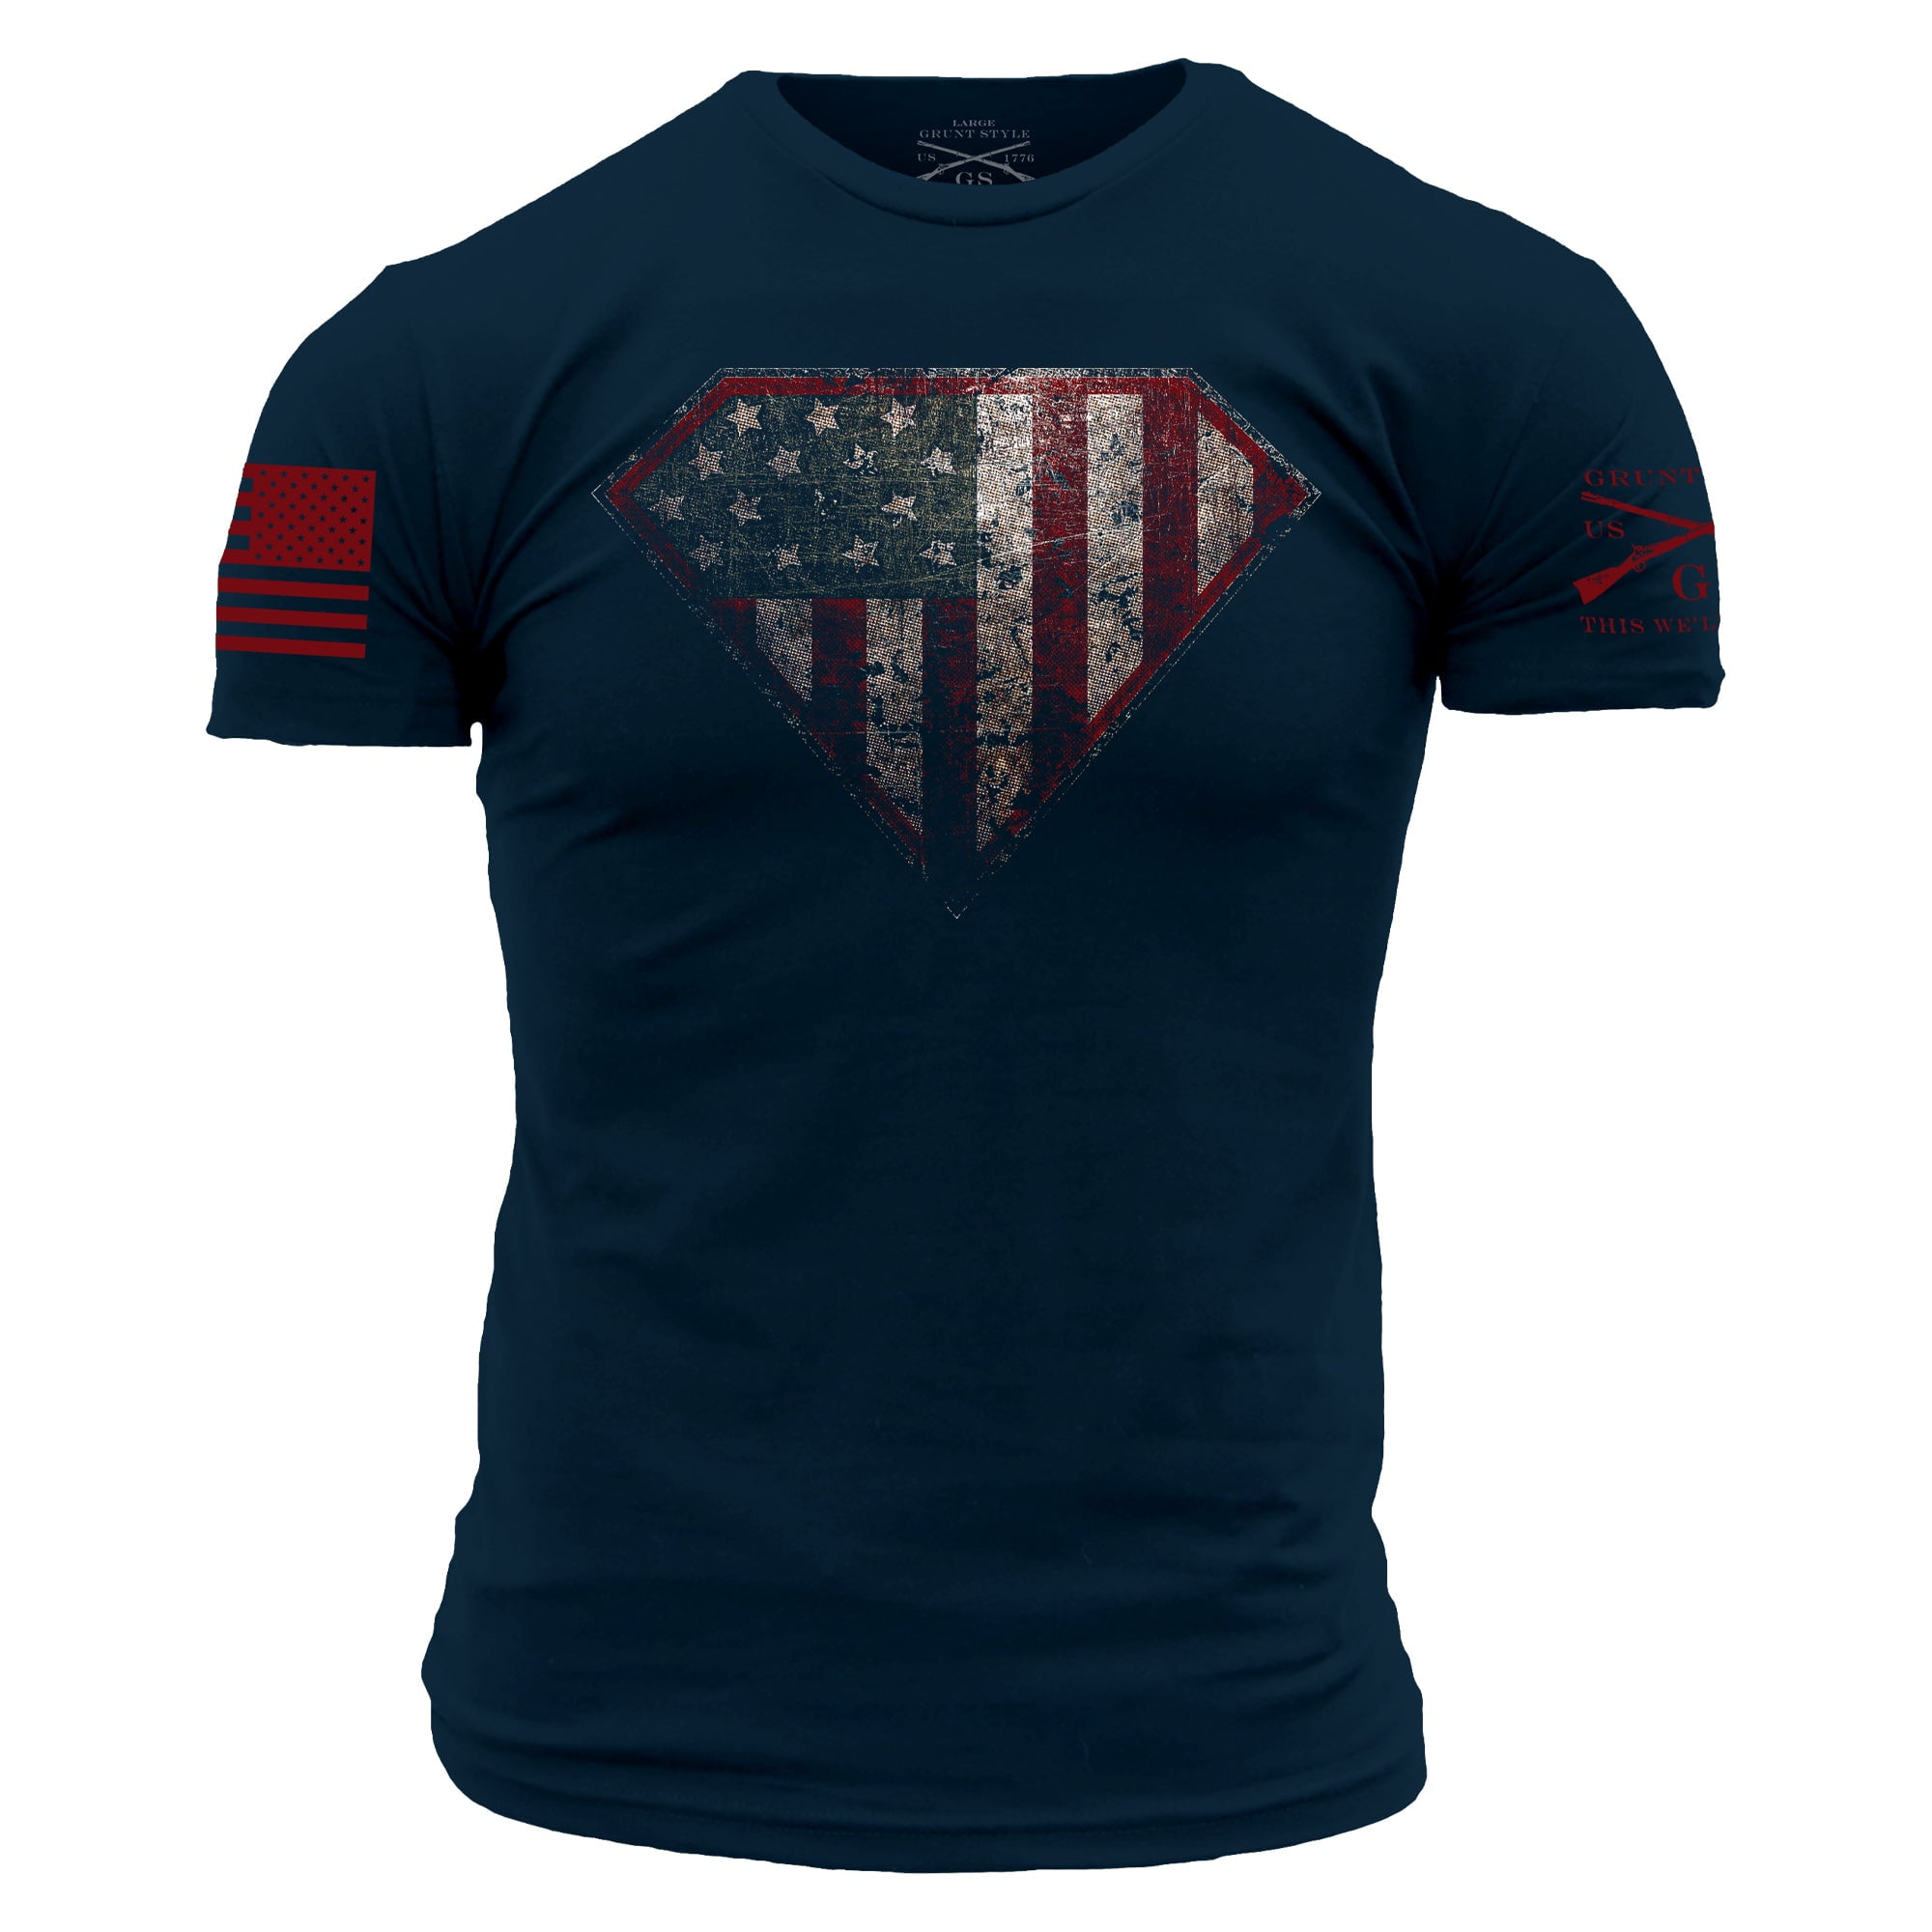 Men's grunt style shirts are known for their patriotic and military-inspired designs that make a bold statement.